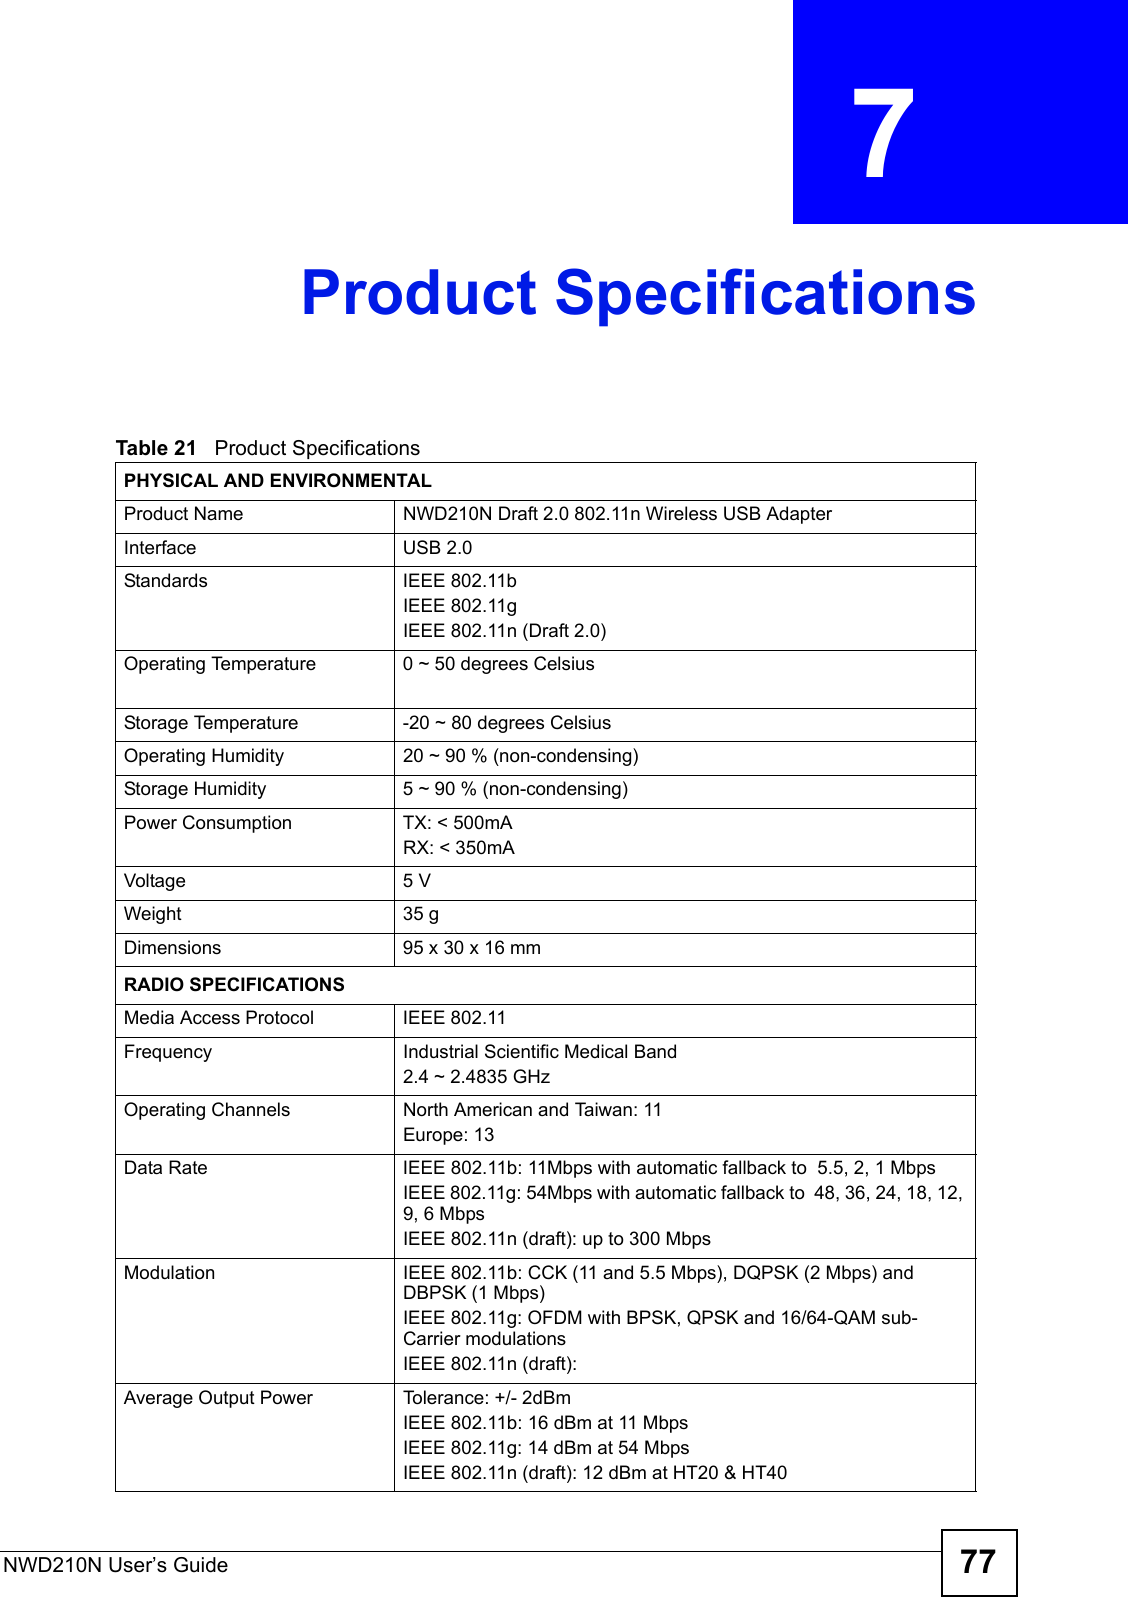 NWD210N User’s Guide 77CHAPTER  7 Product SpecificationsTable 21   Product Specifications PHYSICAL AND ENVIRONMENTALProduct Name  NWD210N Draft 2.0 802.11n Wireless USB AdapterInterface USB 2.0Standards IEEE 802.11bIEEE 802.11gIEEE 802.11n (Draft 2.0)Operating Temperature 0 ~ 50 degrees CelsiusStorage Temperature -20 ~ 80 degrees CelsiusOperating Humidity 20 ~ 90 % (non-condensing)Storage Humidity  5 ~ 90 % (non-condensing)Power Consumption TX: &lt; 500mARX: &lt; 350mAVoltage 5 VWeight 35 gDimensions 95 x 30 x 16 mmRADIO SPECIFICATIONSMedia Access Protocol IEEE 802.11Frequency Industrial Scientific Medical Band2.4 ~ 2.4835 GHzOperating Channels North American and Taiwan: 11Europe: 13Data Rate IEEE 802.11b: 11Mbps with automatic fallback to  5.5, 2, 1 Mbps IEEE 802.11g: 54Mbps with automatic fallback to  48, 36, 24, 18, 12, 9, 6 MbpsIEEE 802.11n (draft): up to 300 MbpsModulation IEEE 802.11b: CCK (11 and 5.5 Mbps), DQPSK (2 Mbps) and DBPSK (1 Mbps)IEEE 802.11g: OFDM with BPSK, QPSK and 16/64-QAM sub-Carrier modulationsIEEE 802.11n (draft):Average Output Power Tolerance: +/- 2dBmIEEE 802.11b: 16 dBm at 11 MbpsIEEE 802.11g: 14 dBm at 54 MbpsIEEE 802.11n (draft): 12 dBm at HT20 &amp; HT40